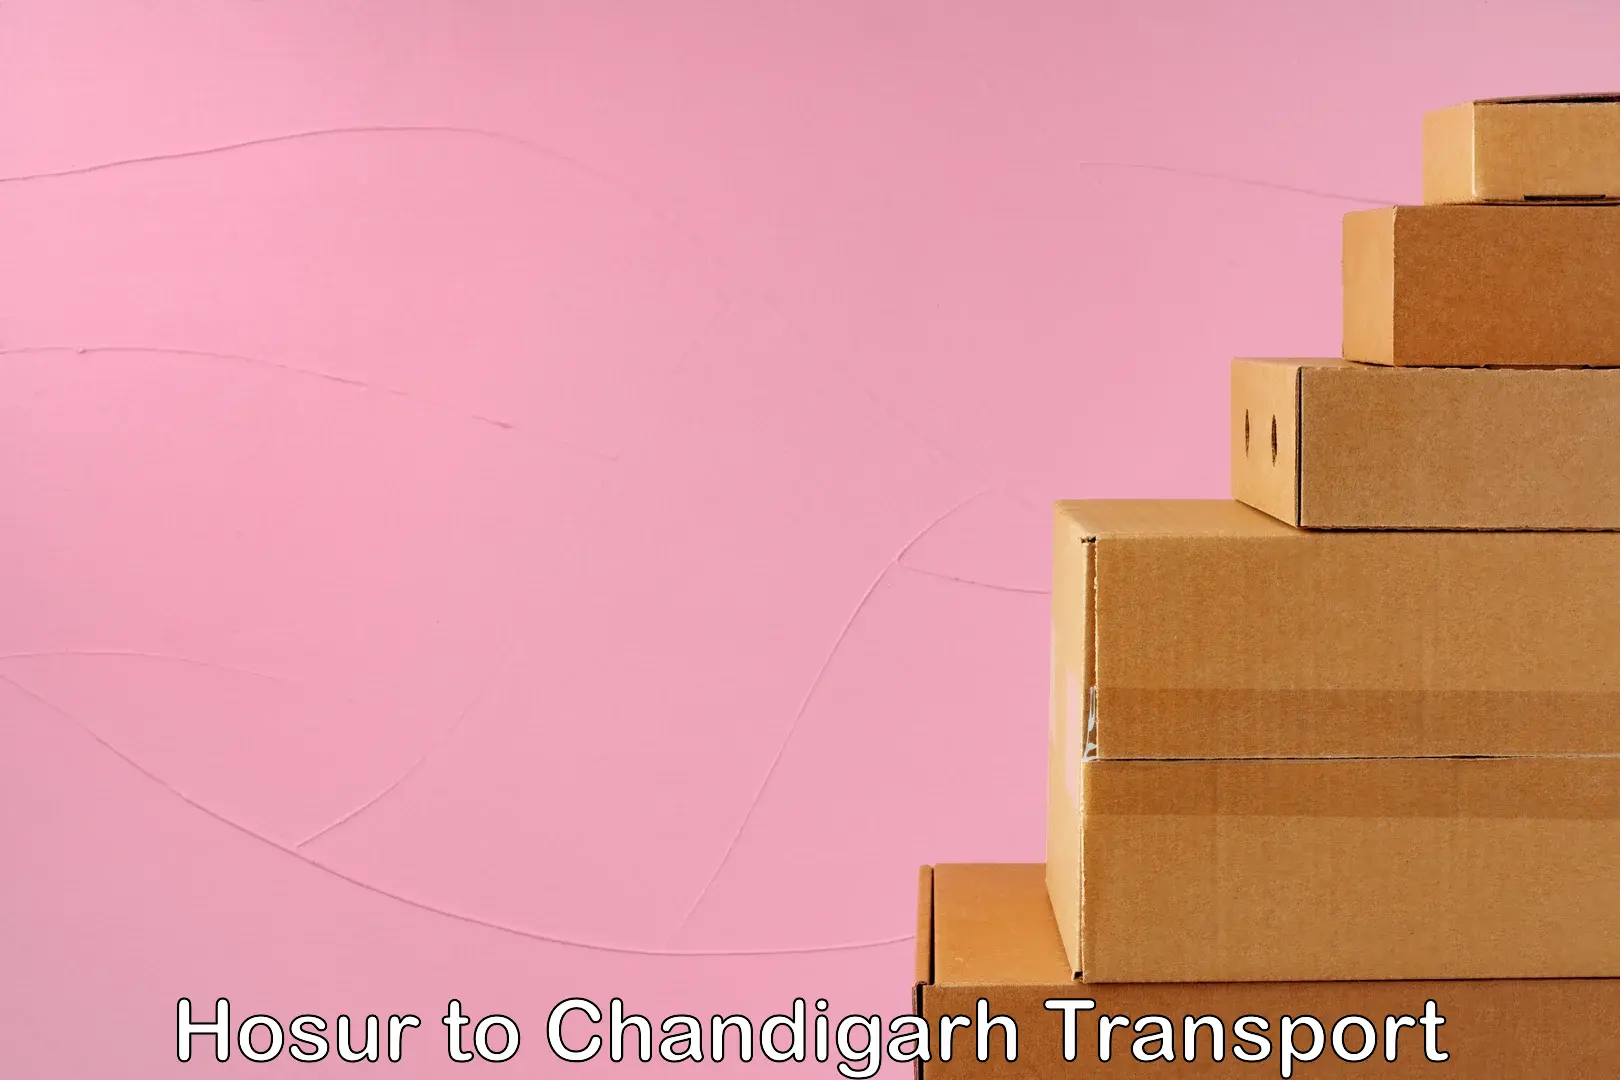 Cycle transportation service Hosur to Chandigarh